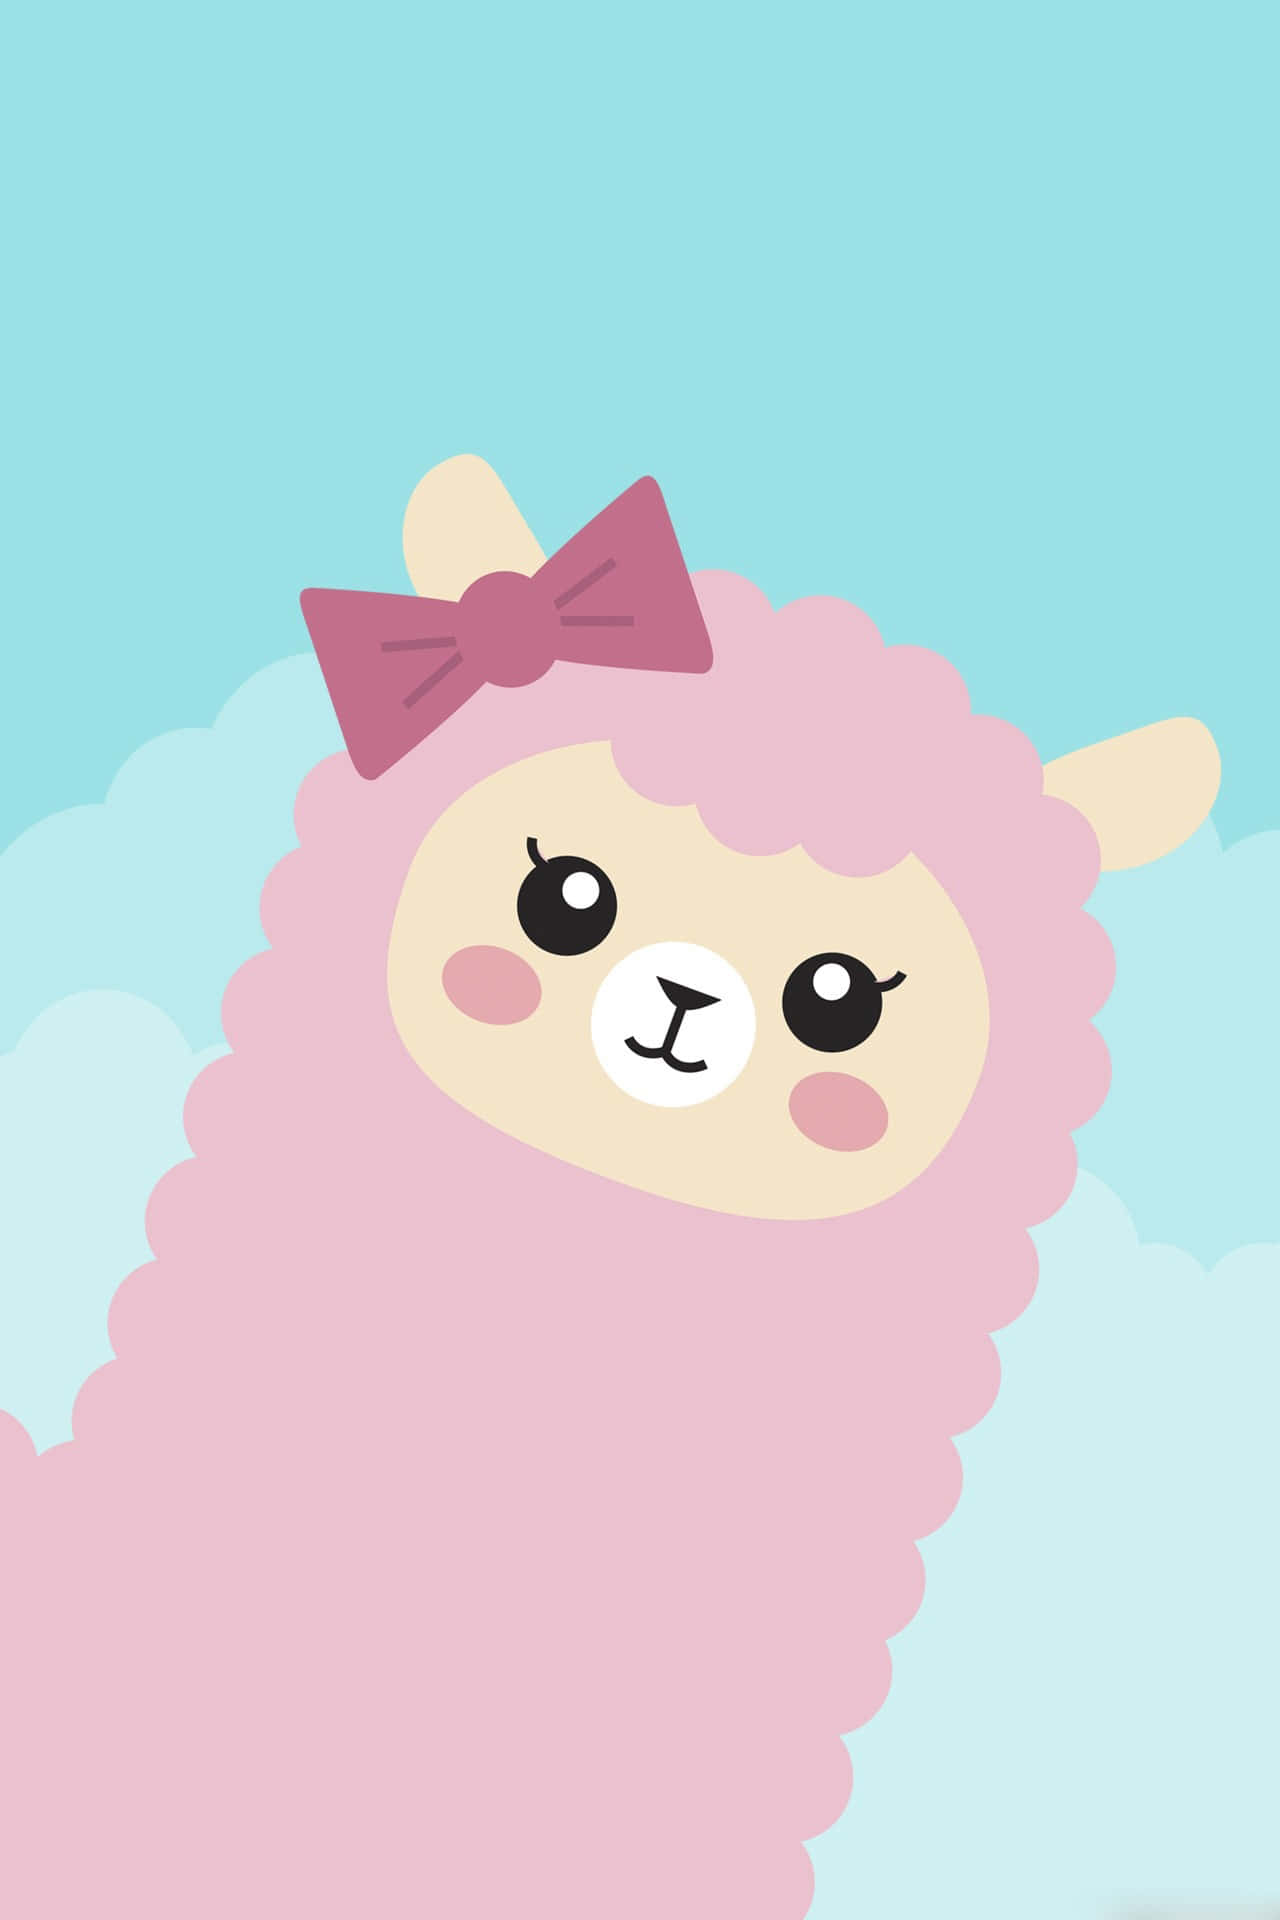 A Cute Llama With A Pink Bow On Its Head